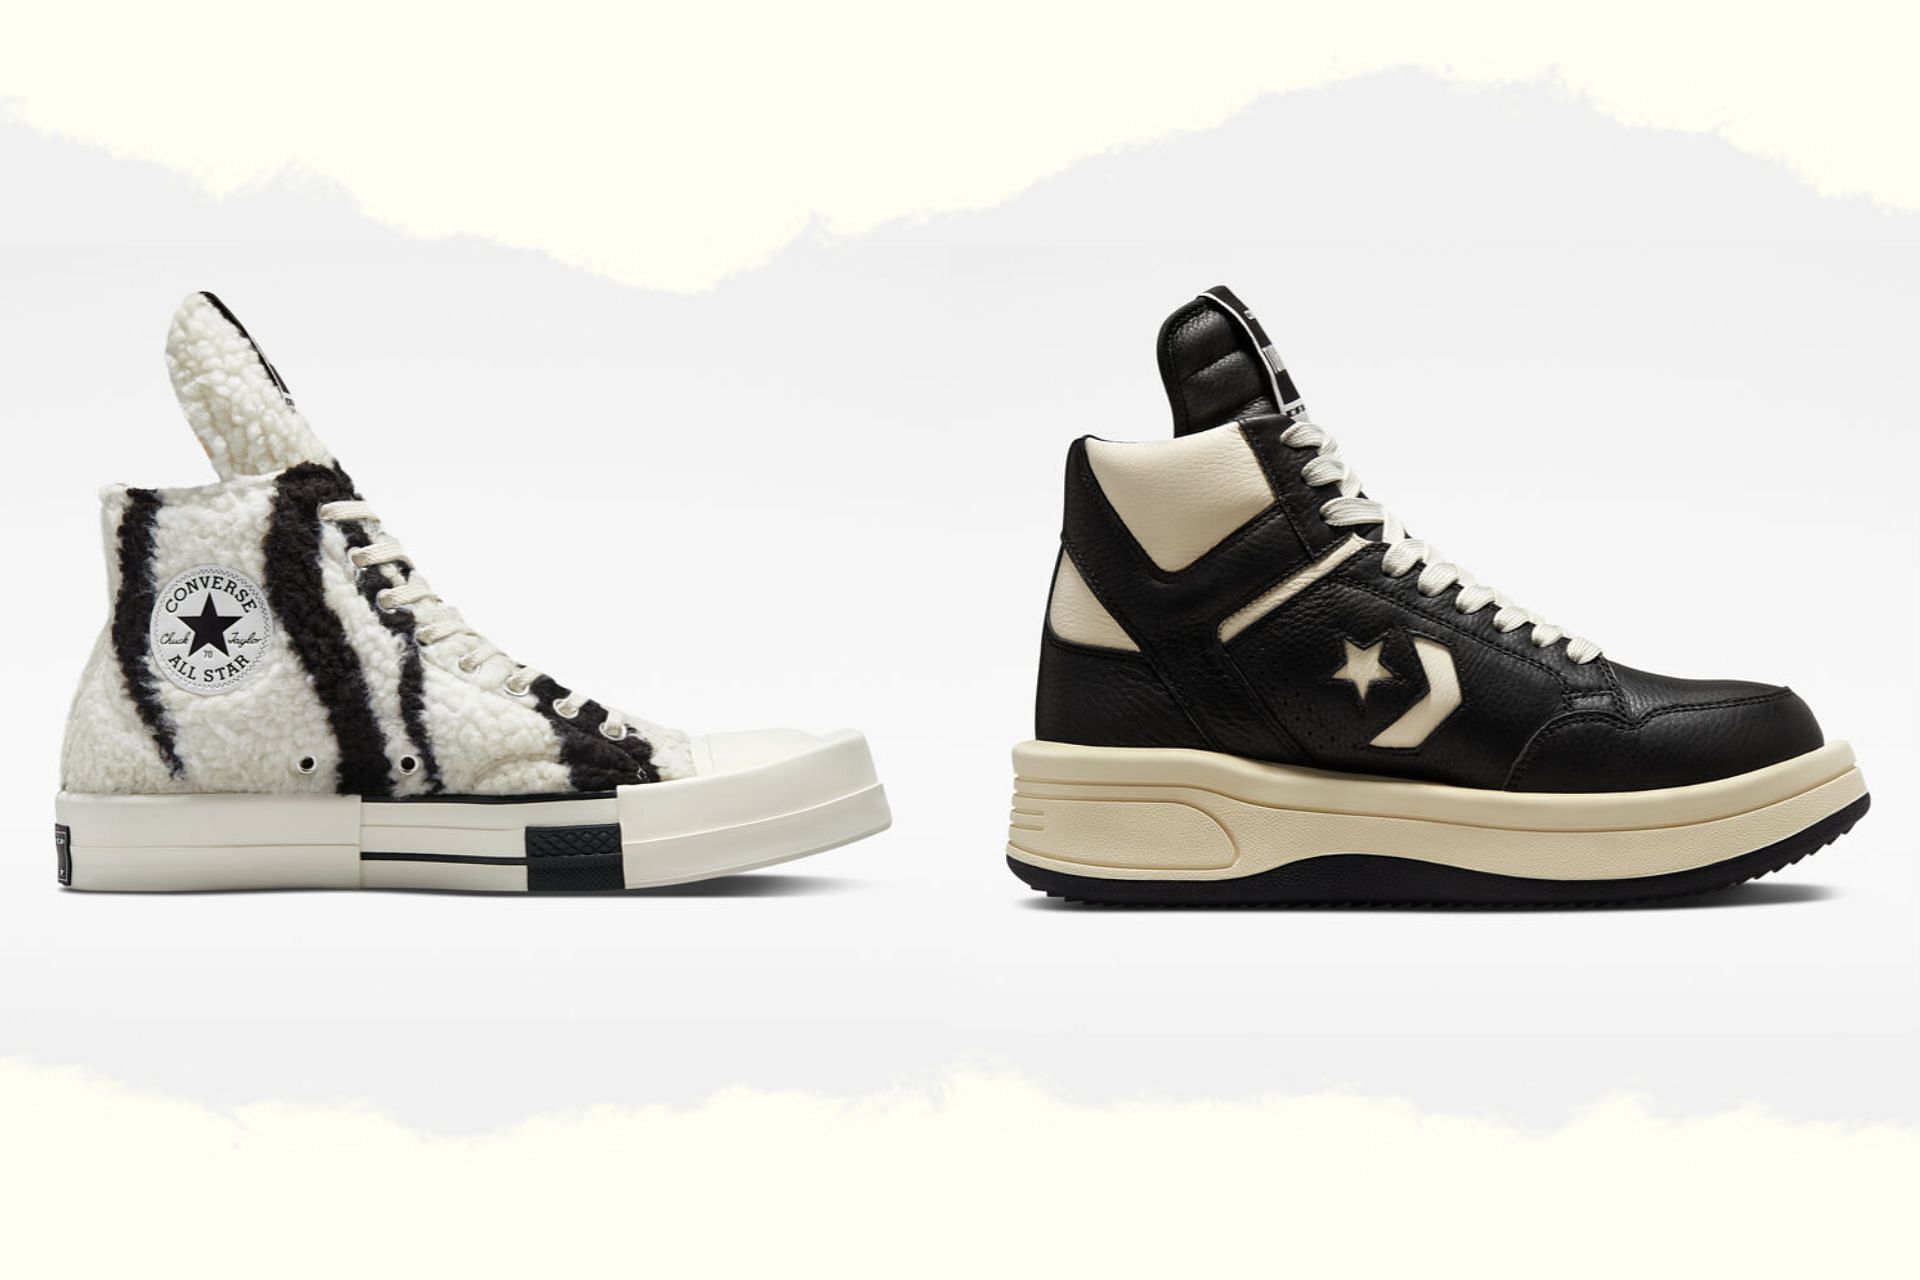 Converse x Rick Owens DRKSHDW sneaker collection: Where to buy